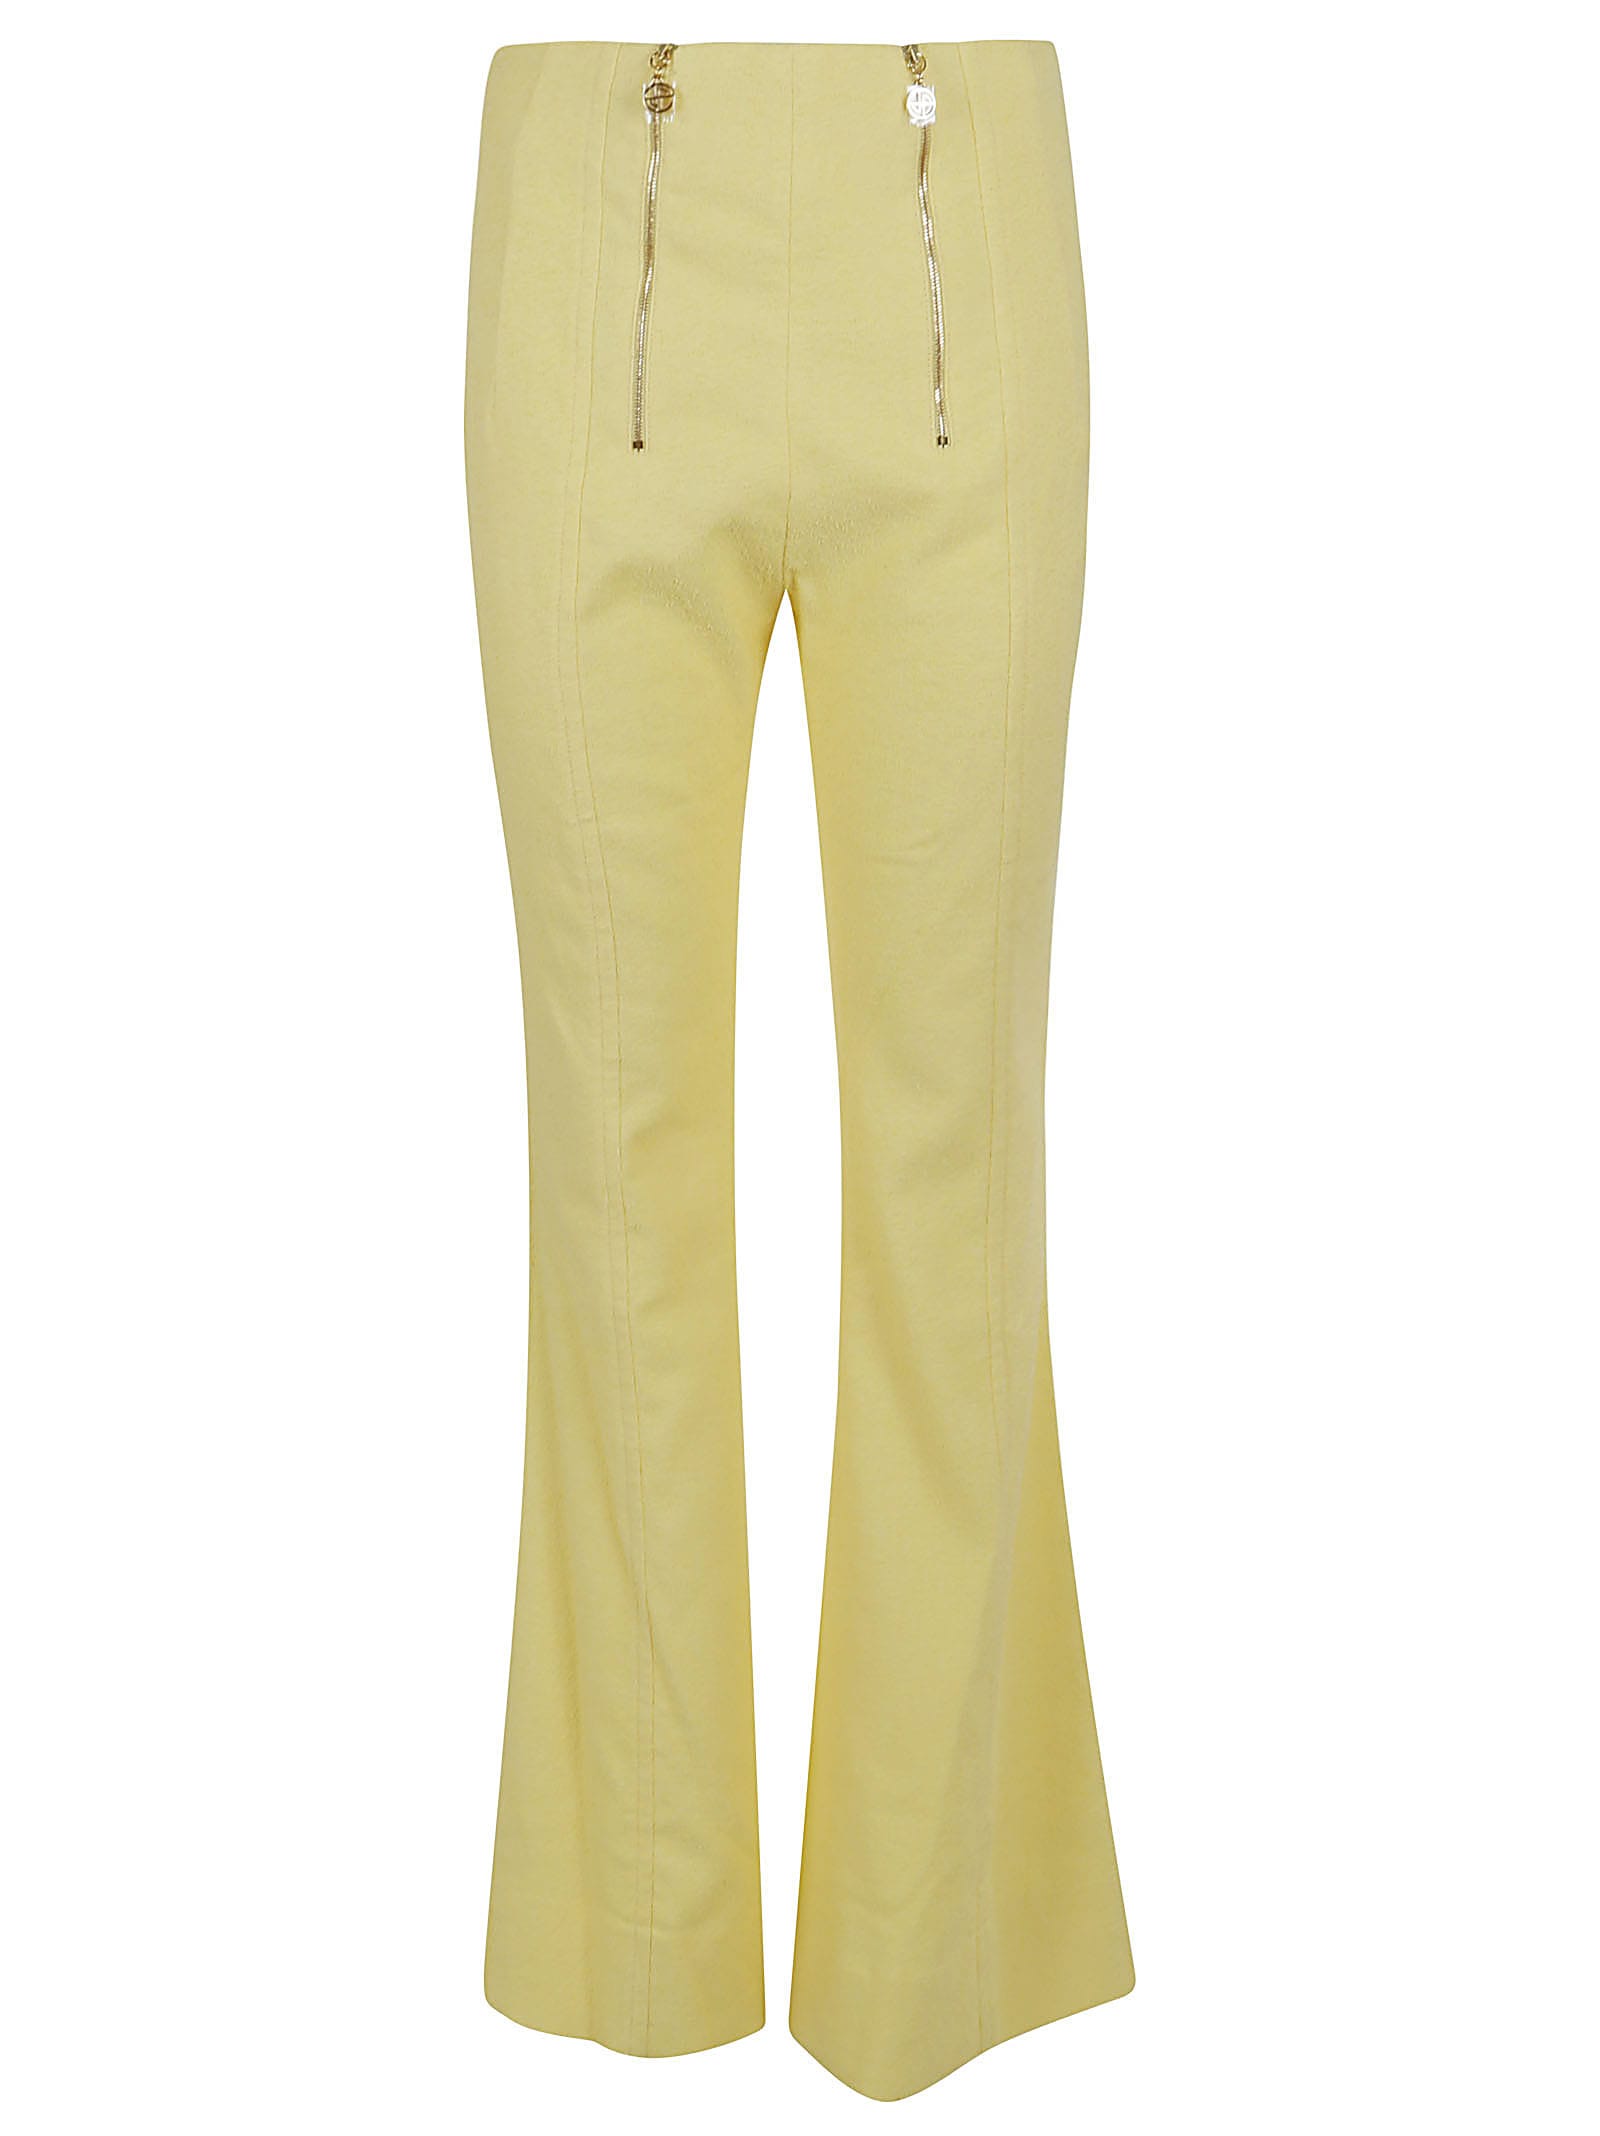 PATOU ZIPPERS FLARE TROUSERS